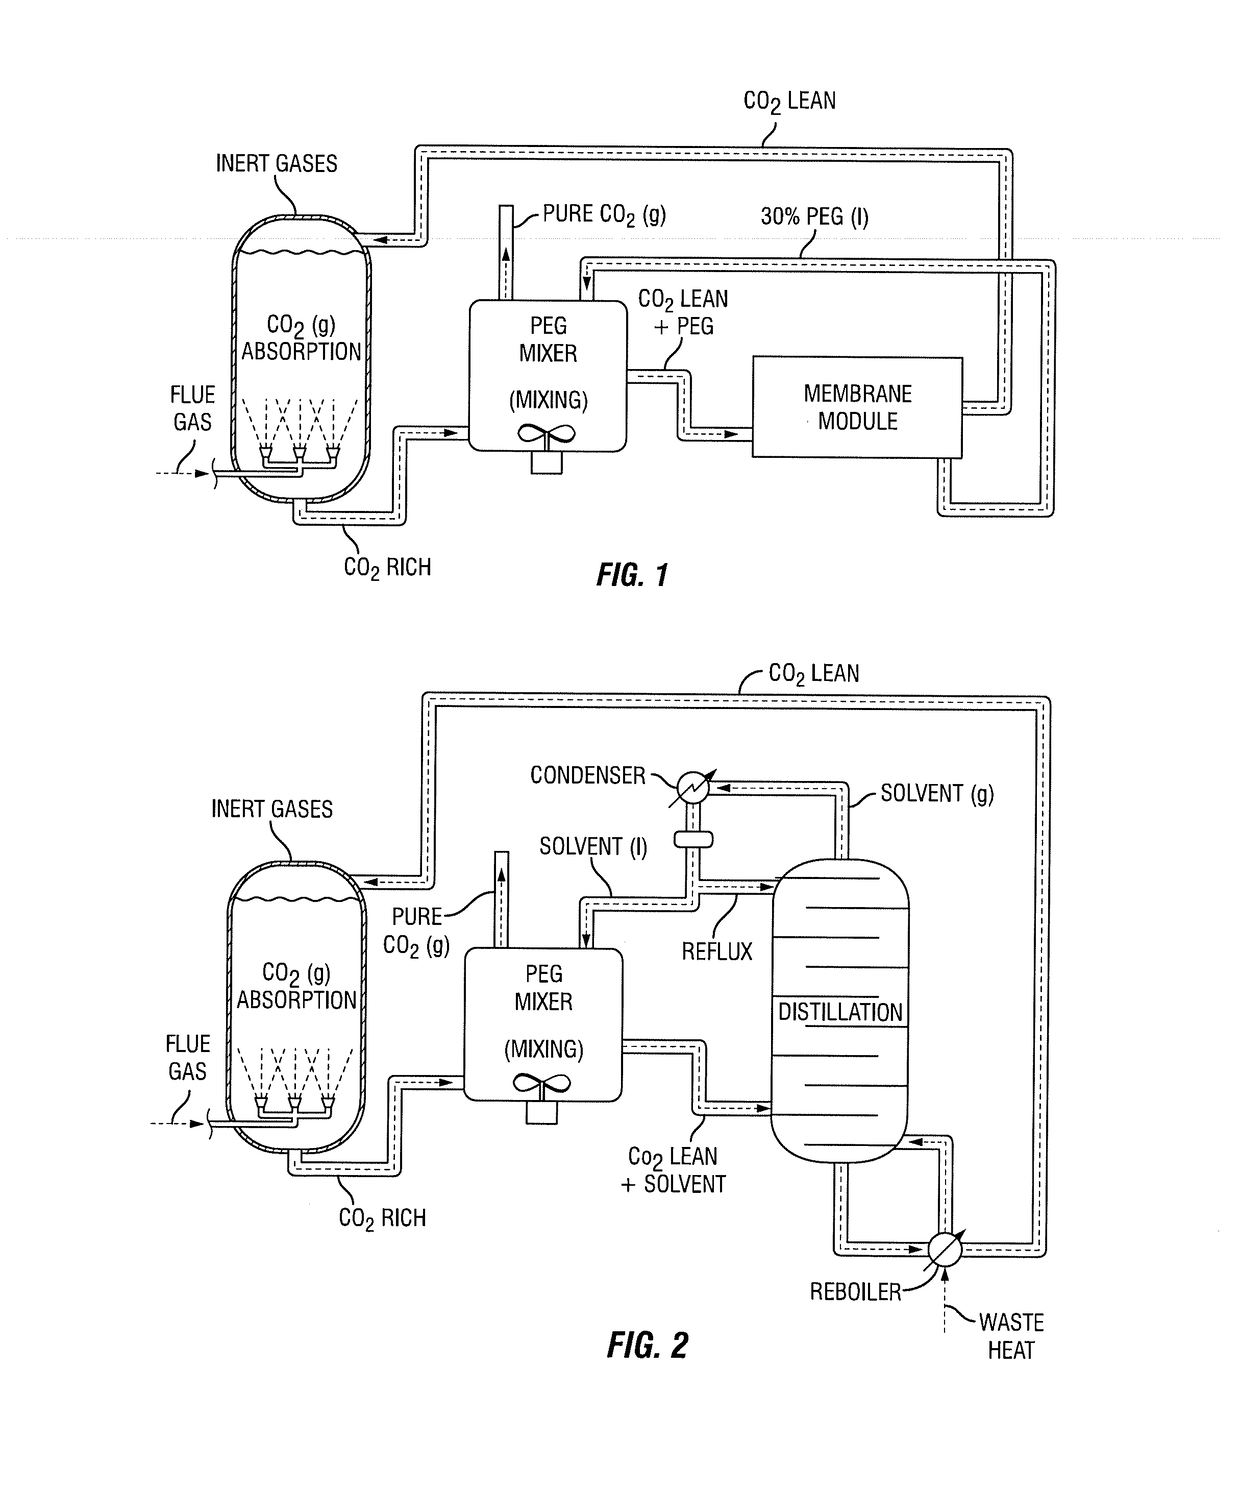 Integrated process for capturing carbon dioxide